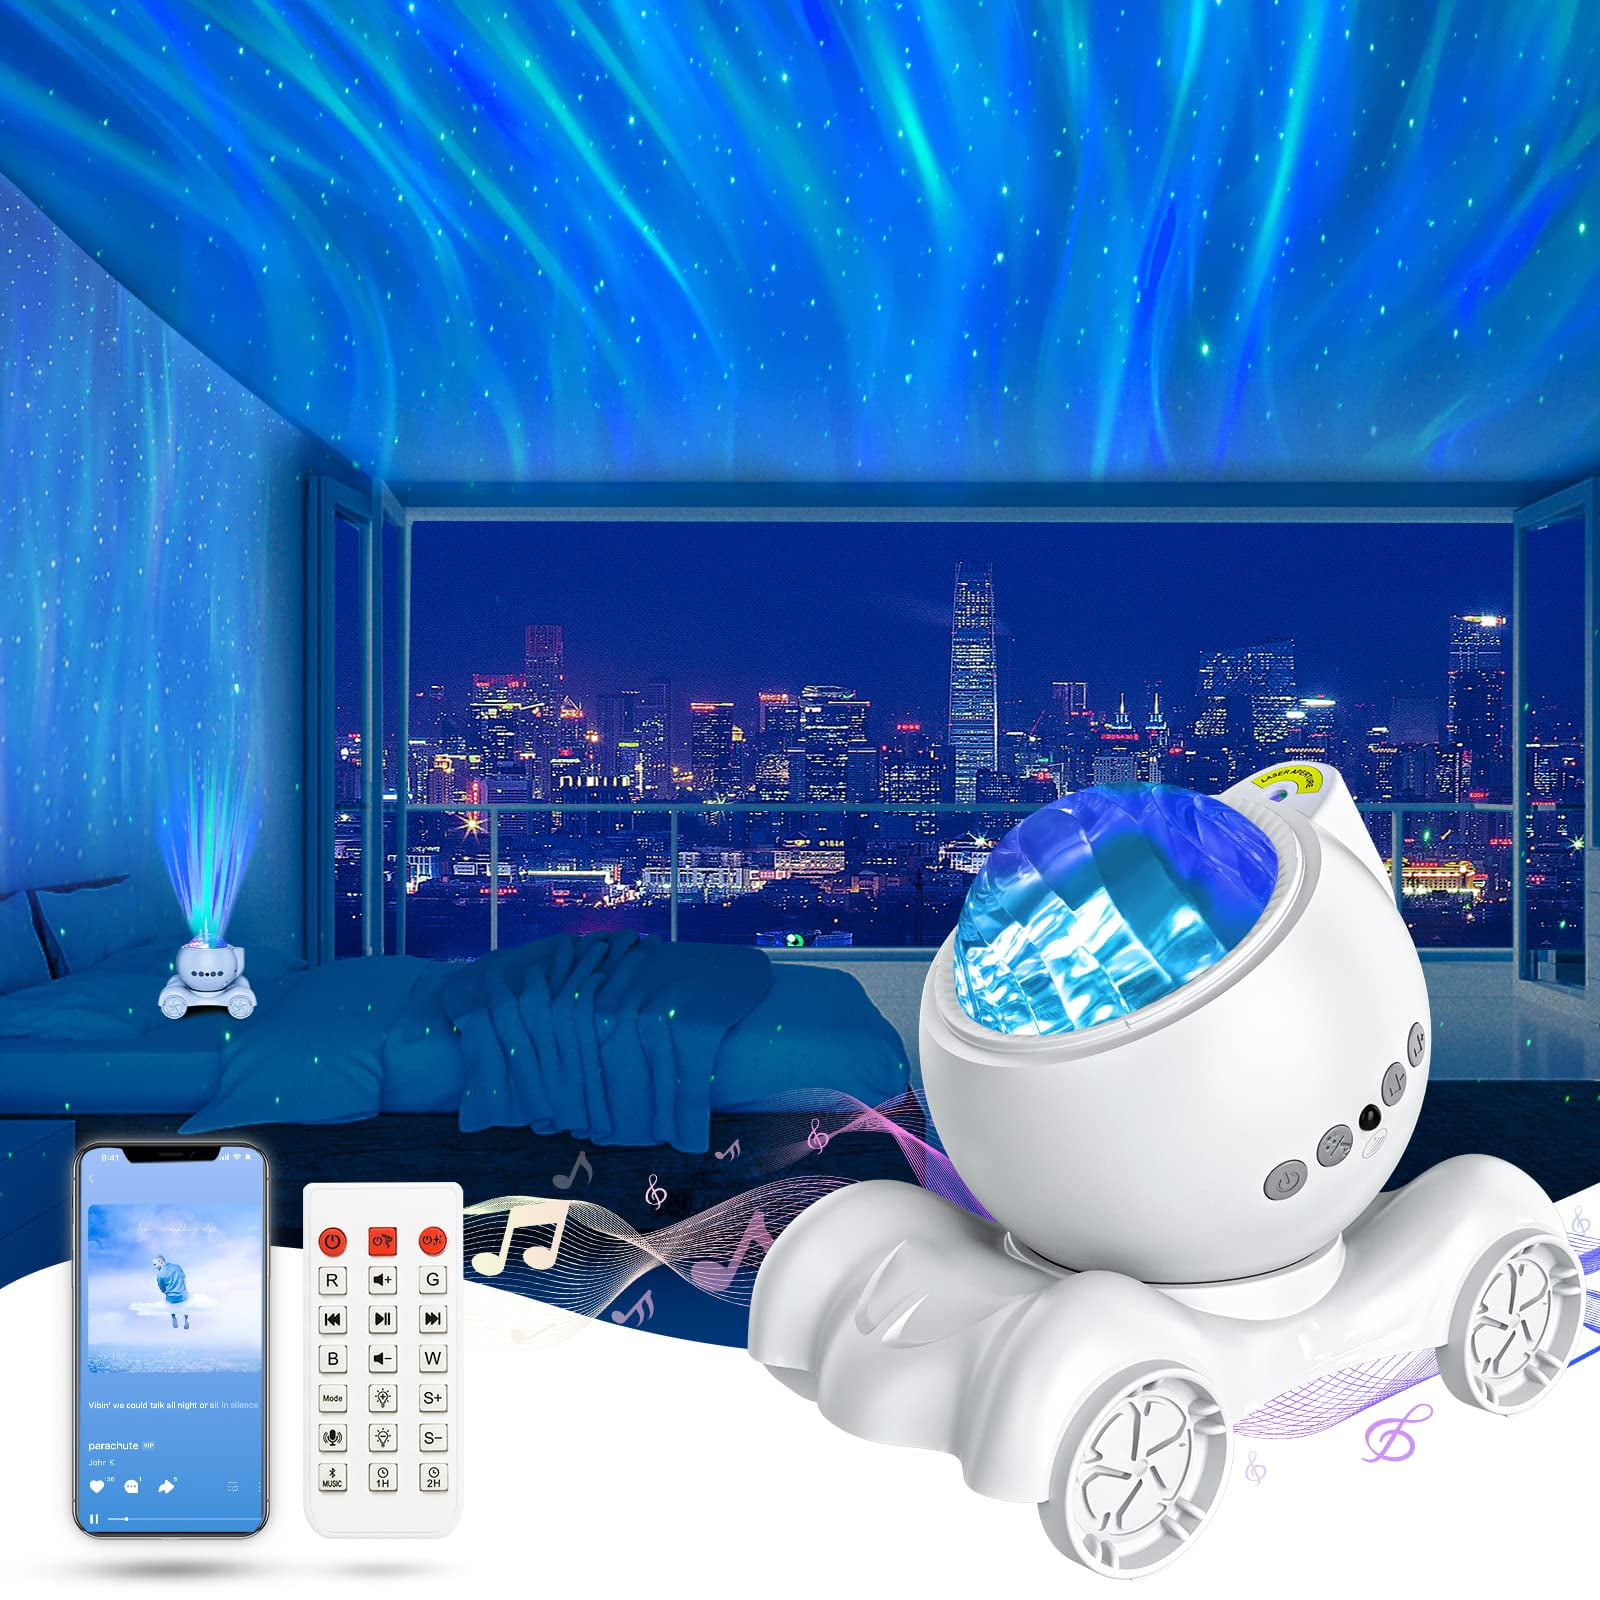 ENOKIK Aurora Projector, Galaxy Projector for Bedroom Built-in Bluetooth  Speaker, Night Light Projector for Kids Adult, Star Projector for  Bedroom/Ceiling/Party/Gift 